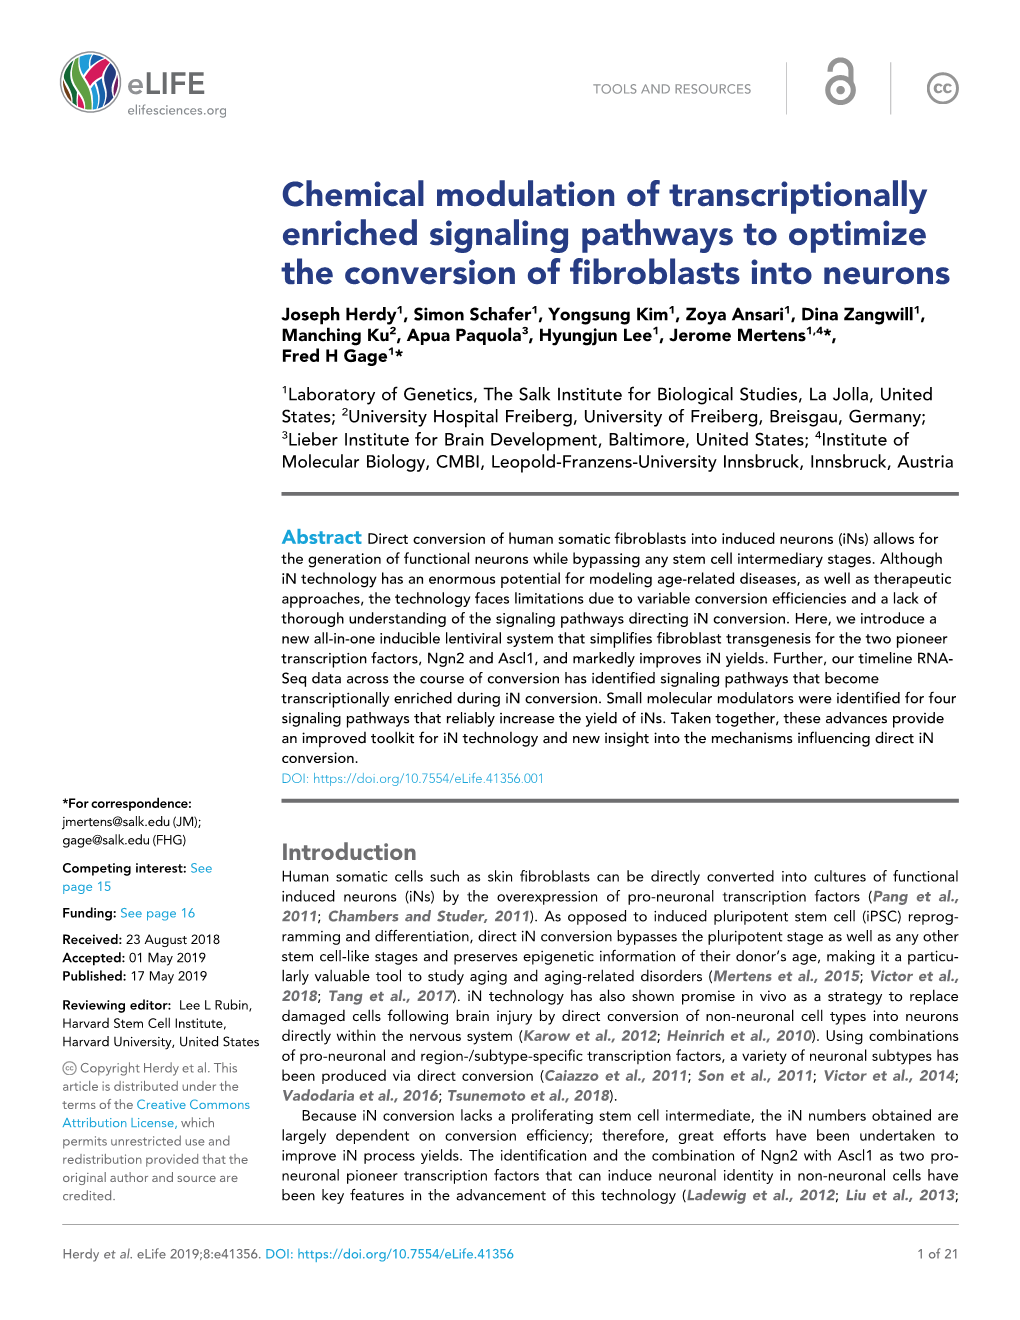 Chemical Modulation of Transcriptionally Enriched Signaling